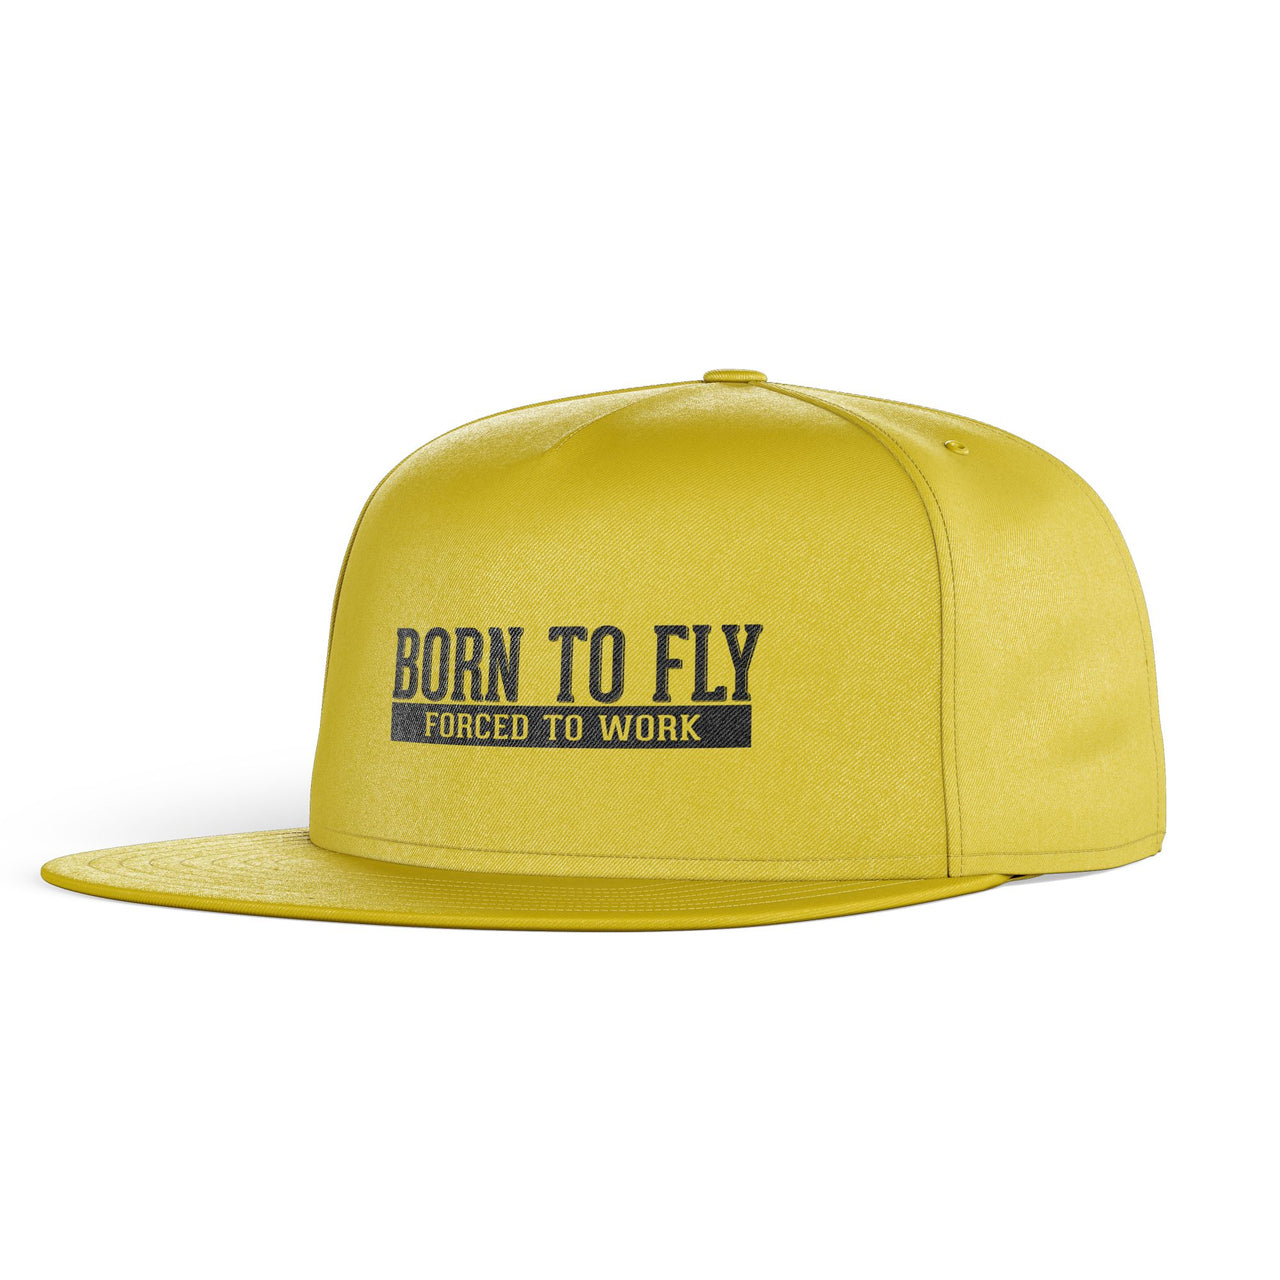 Born To Fly Forced To Work Designed Snapback Caps & Hats